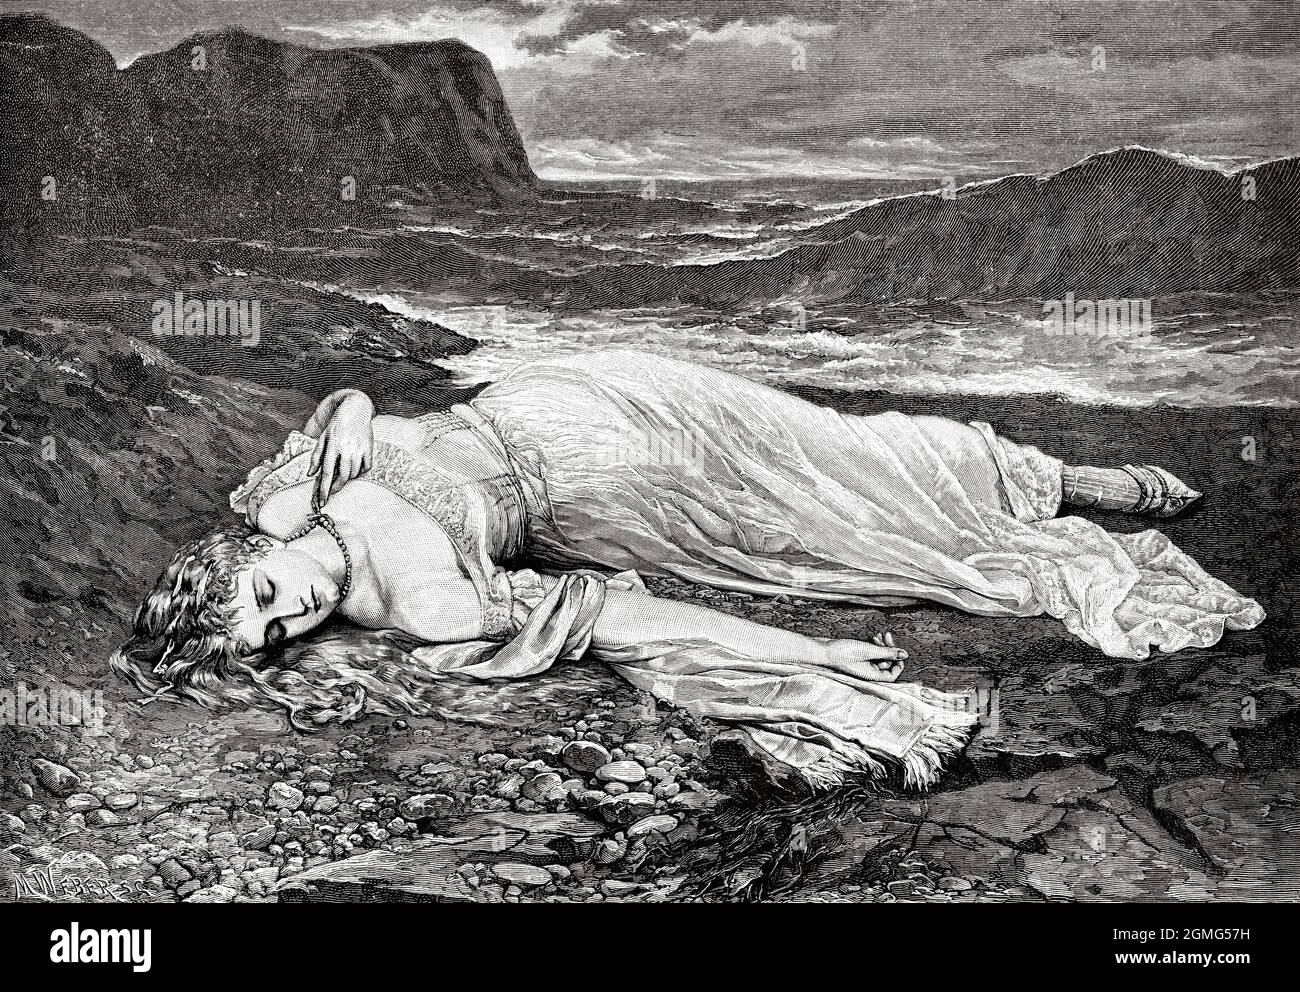 The end of a sold love, painting by Cuno von Bodenhausen (1852-1931) was a German painter. Old 19th century engraved illustration from La Ilustración Artística 1882 Stock Photo